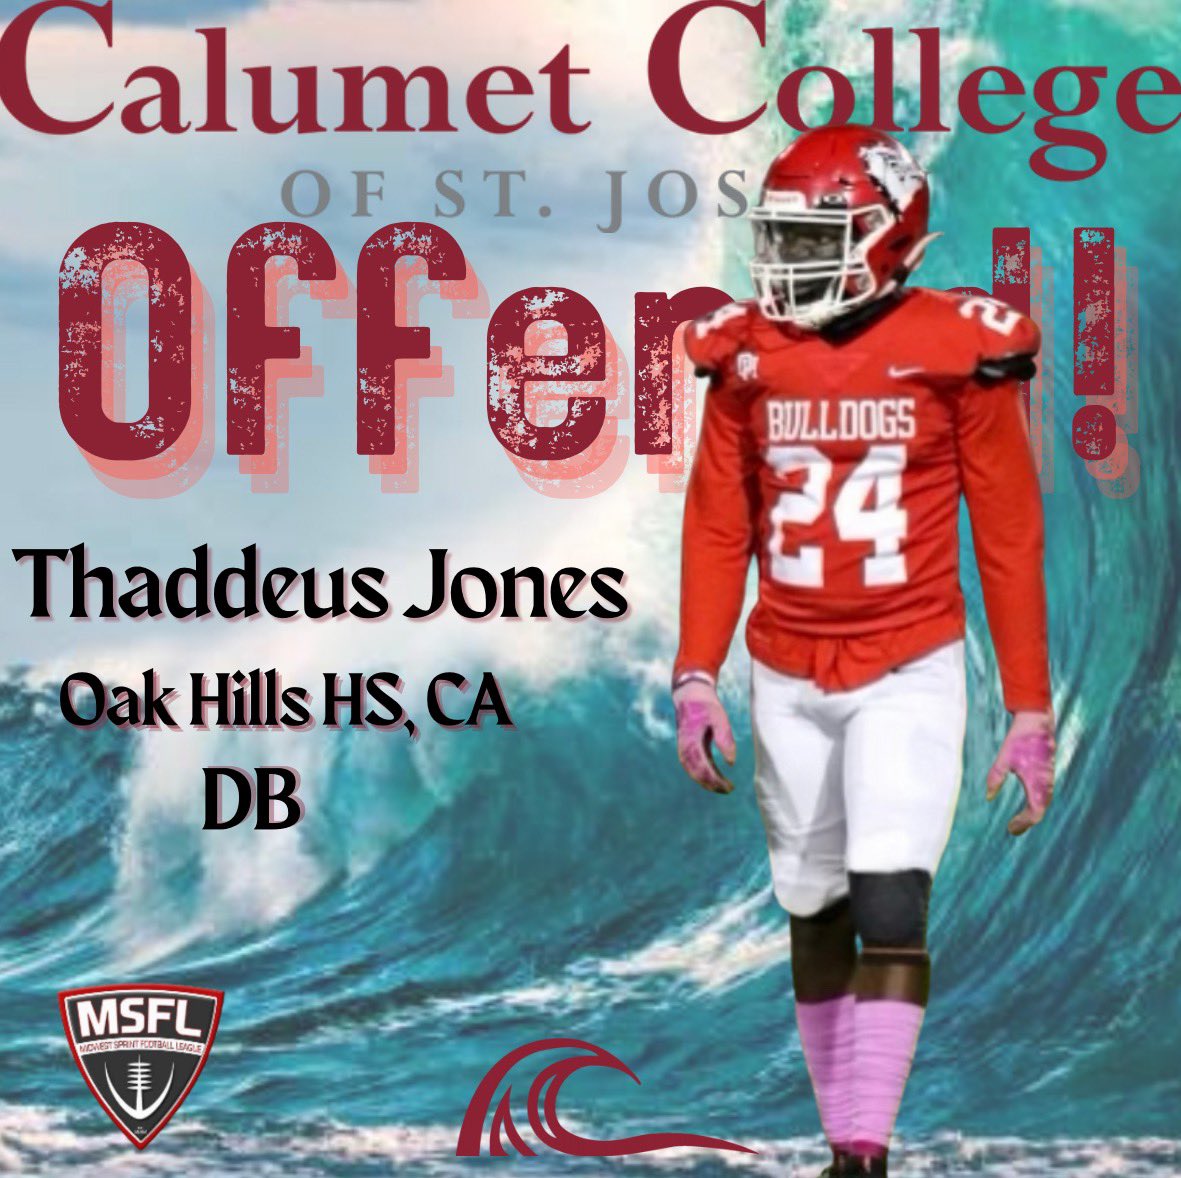 After a great zoom call with @coachjaynovak and @dacoachmohuddle I’m blessed receive an offer from Calumet College ST. Joseph @CCSJFBRecruits @NickMonica63 @coachmetty @OakHillsFootba1 #ComeGrowWithUs